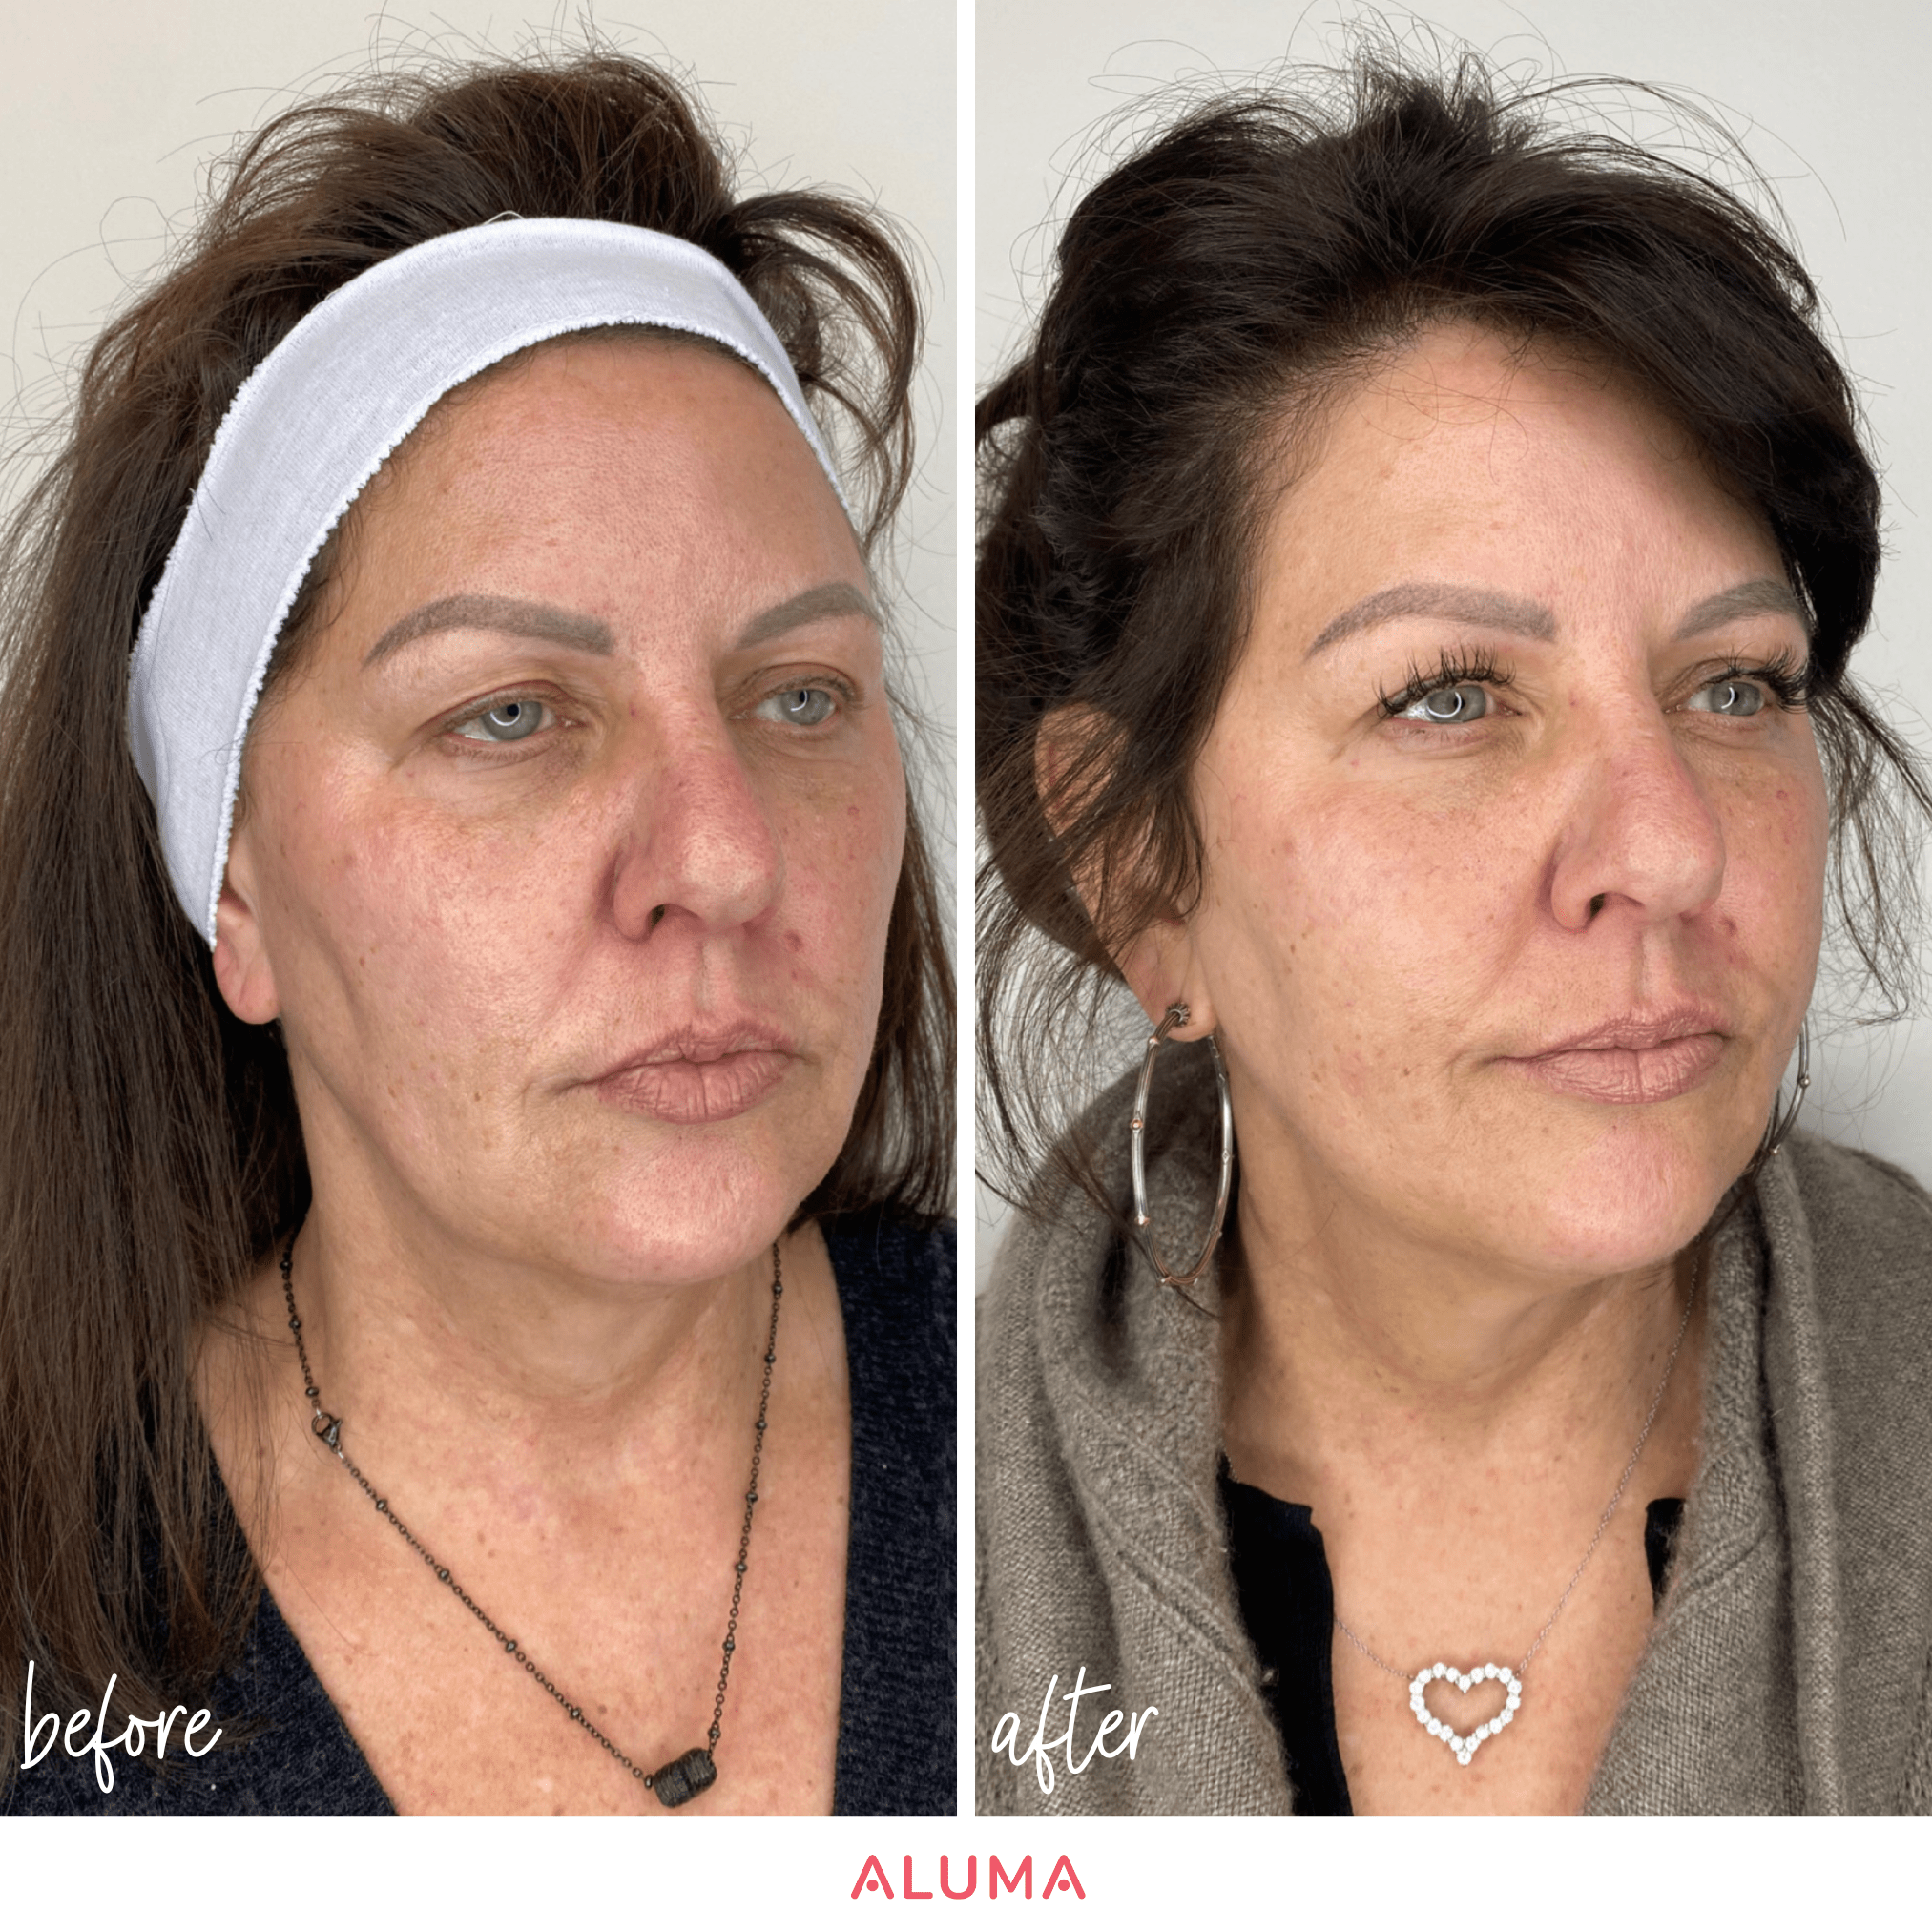 This picture shows the lifting capacity of a threads treatment by showcasing a before and after photo of a thread treatment that Dr. Brigham performed al Aluma Aesthetic Medicine in Portland, Oregon.